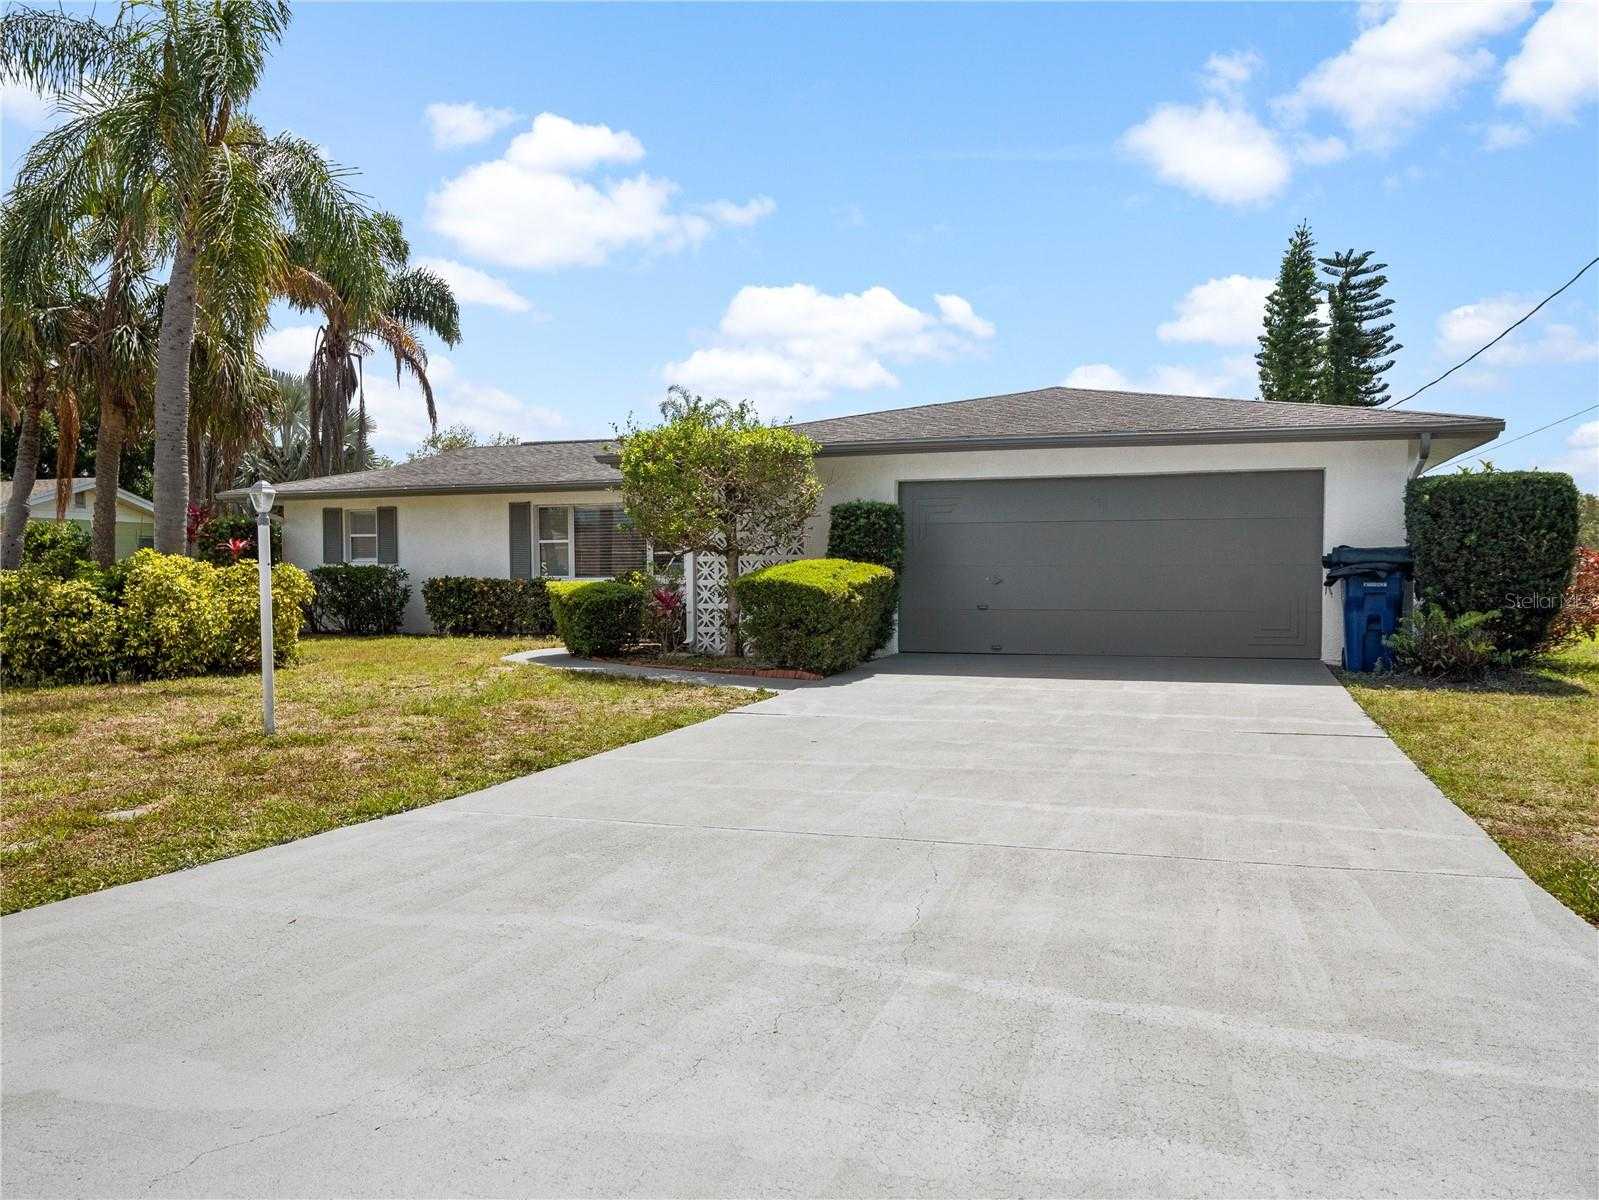 $539,000 - 3Br/2Ba -  for Sale in Whitfield Country Club Add Rep, Sarasota